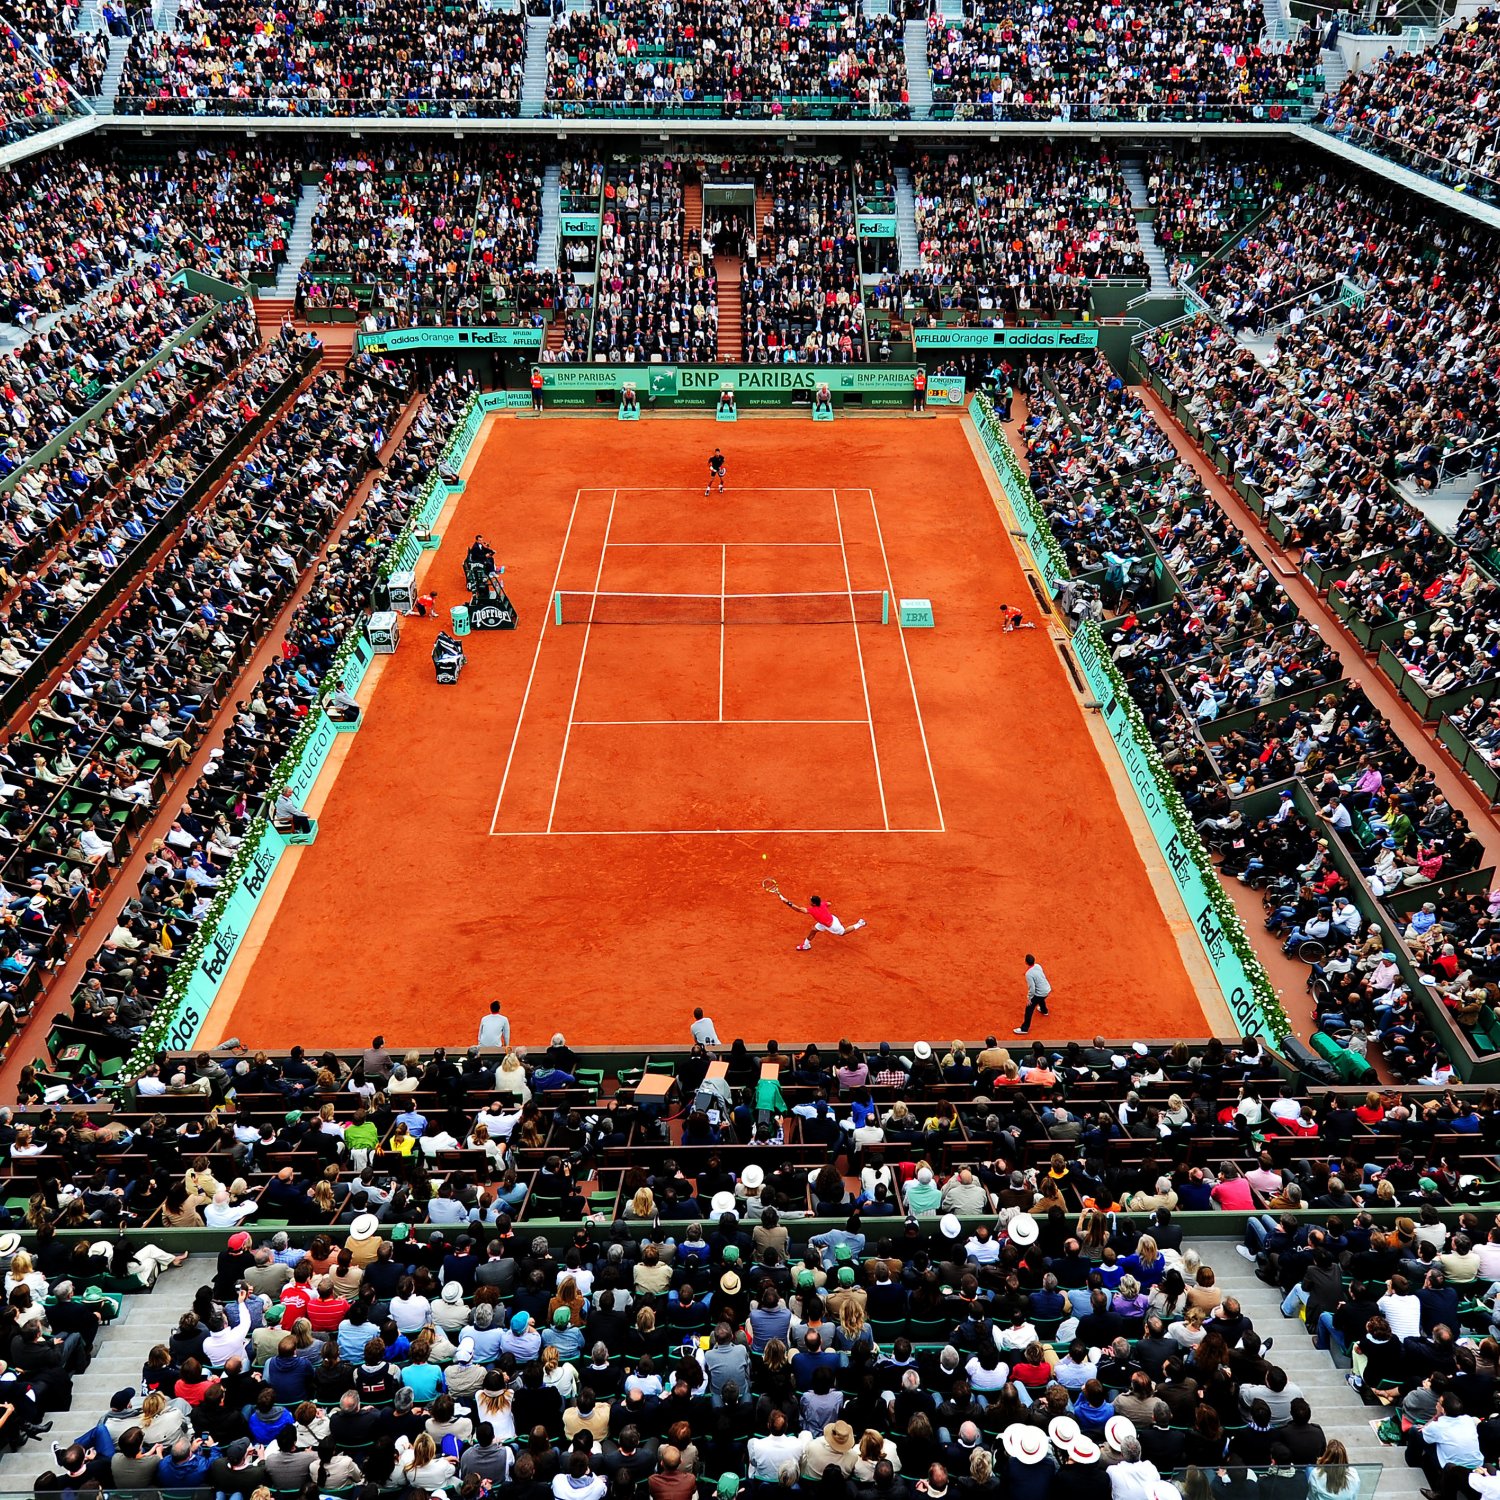 French Open 2013: 10 Rising Stars Ready to Emerge at Roland Garros